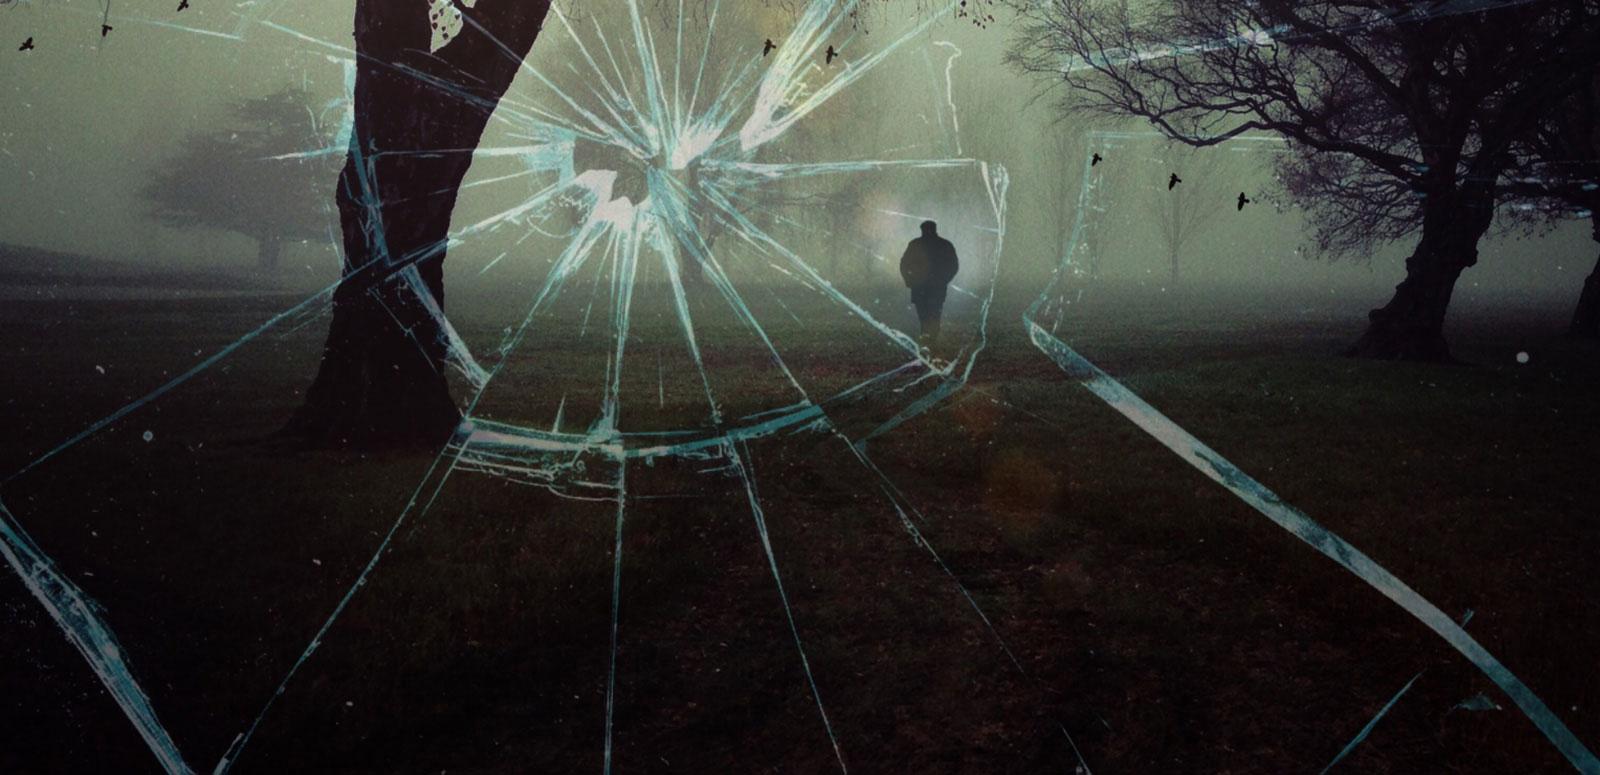 View from a window that has been shattered showing a dark, shadowy figure of a man walking through a grassy field between some trees.